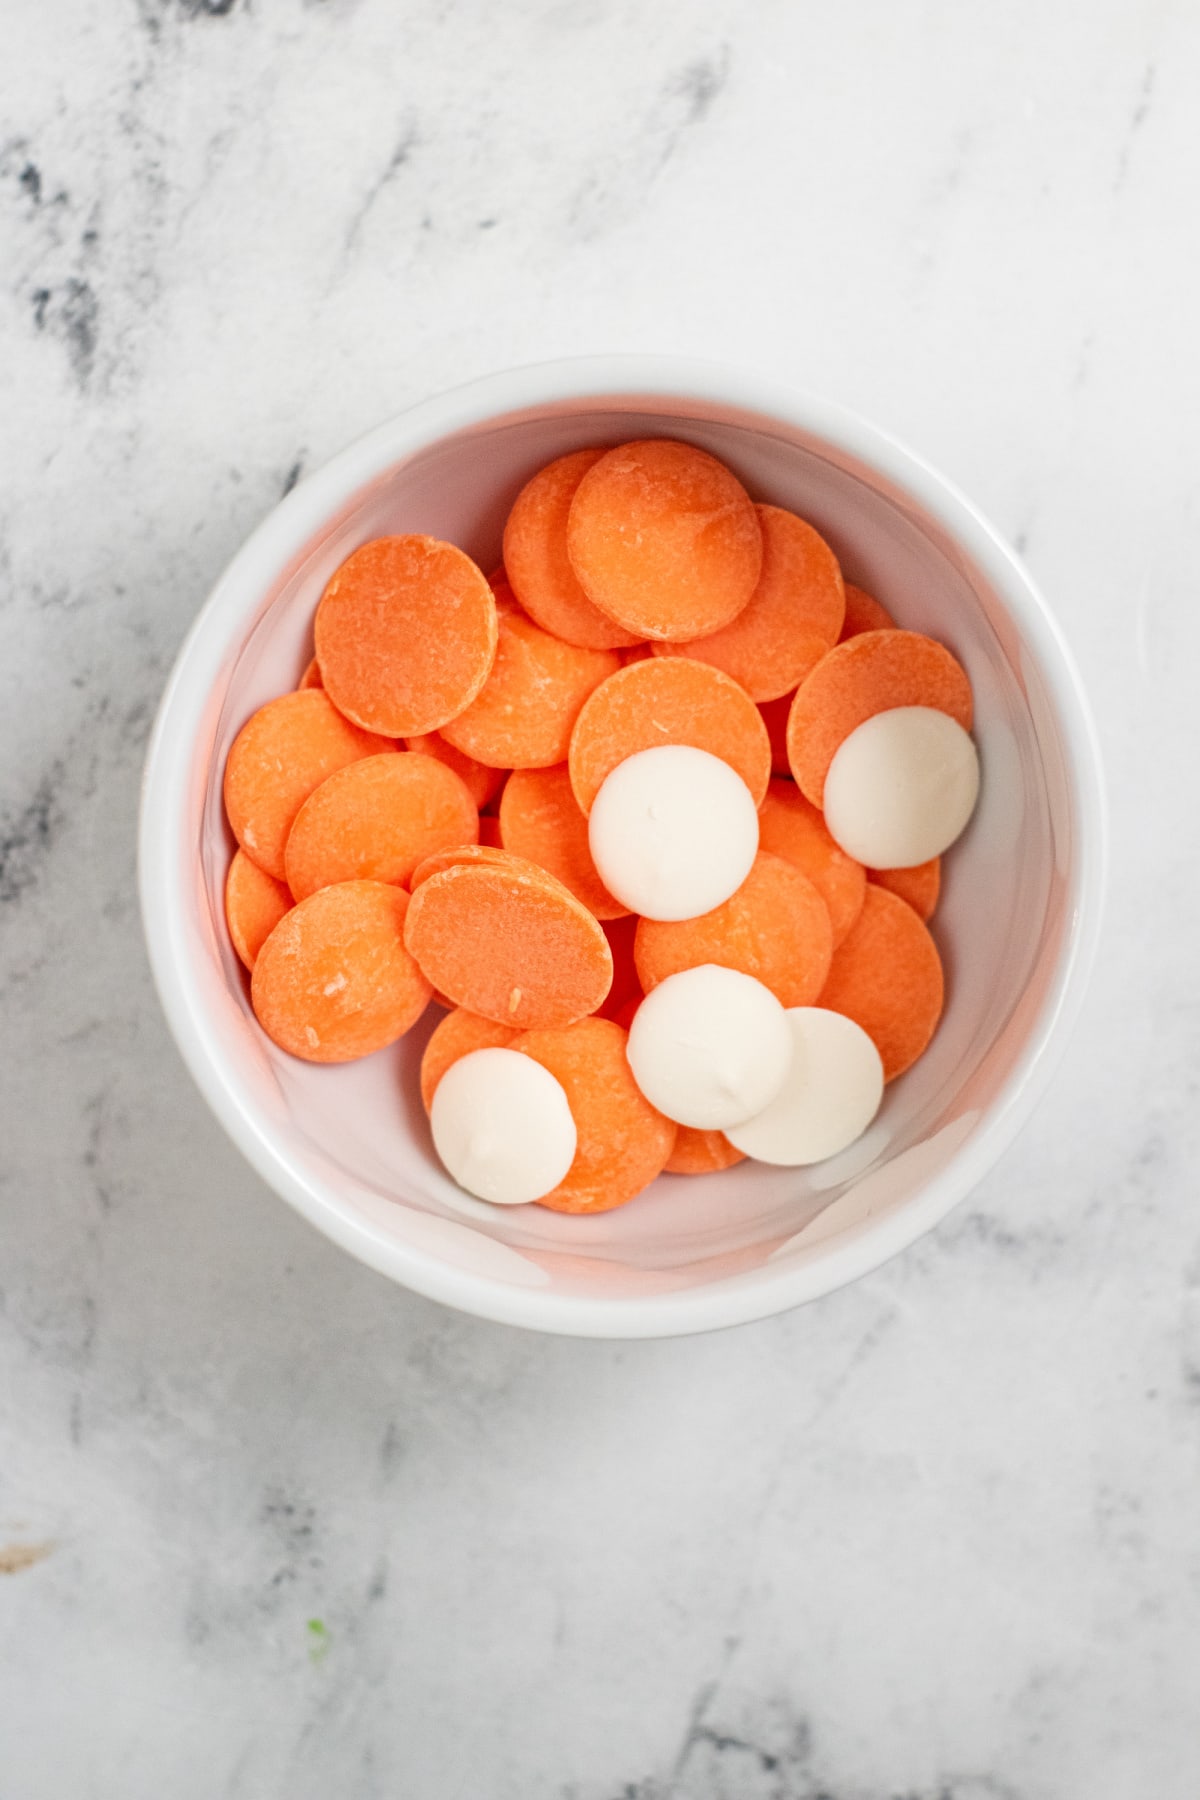 Orange and white candy melts in bowl